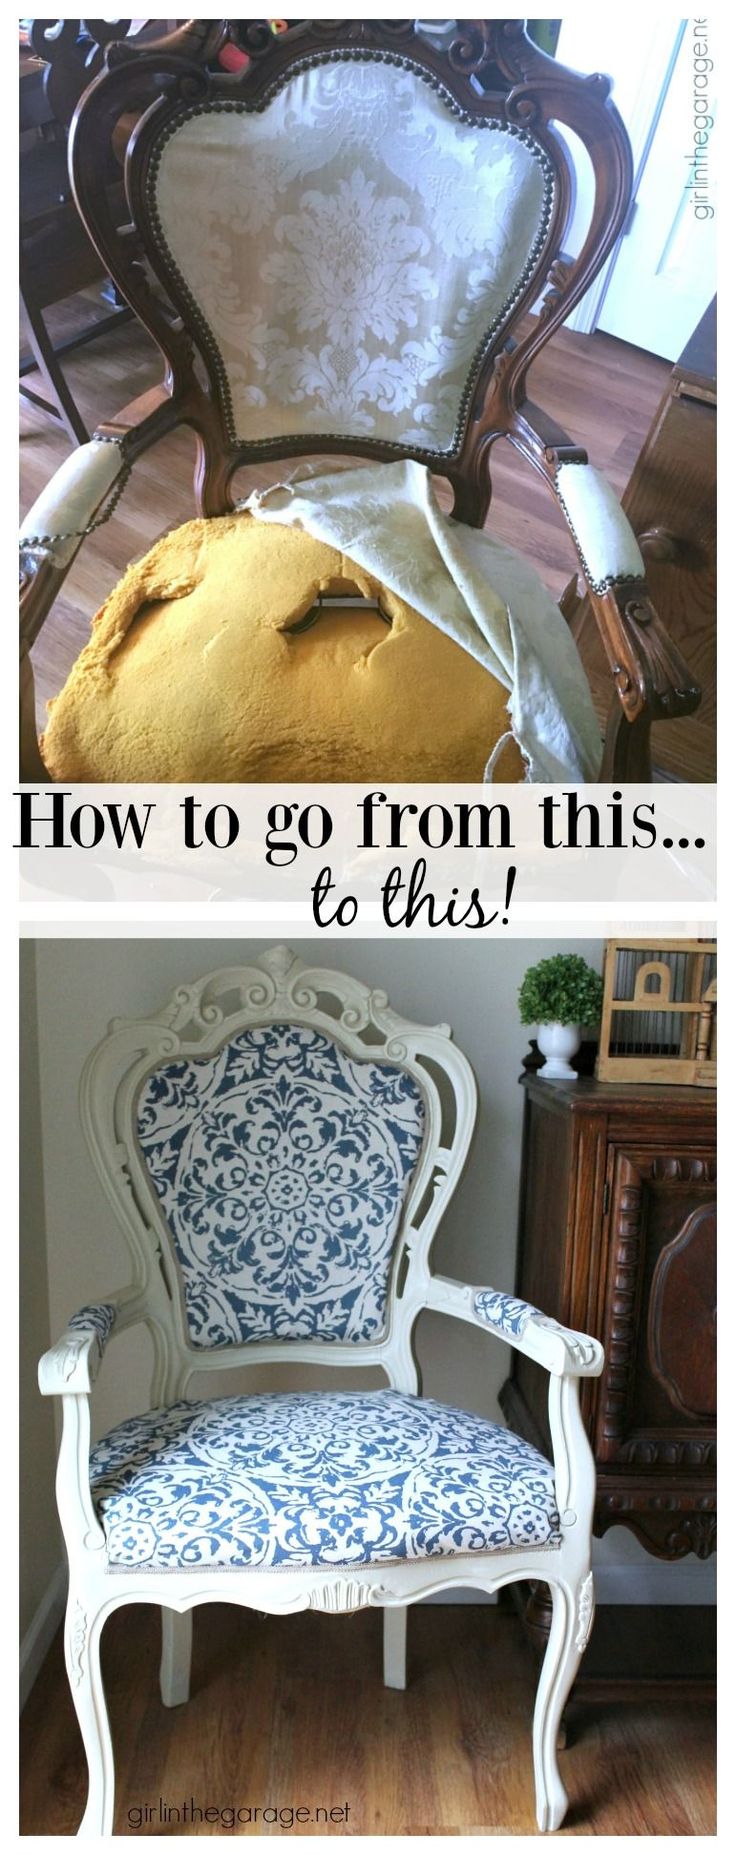 DIY Reupholstered chair makeover with Chalk Paint and clearance curtain as fabri...